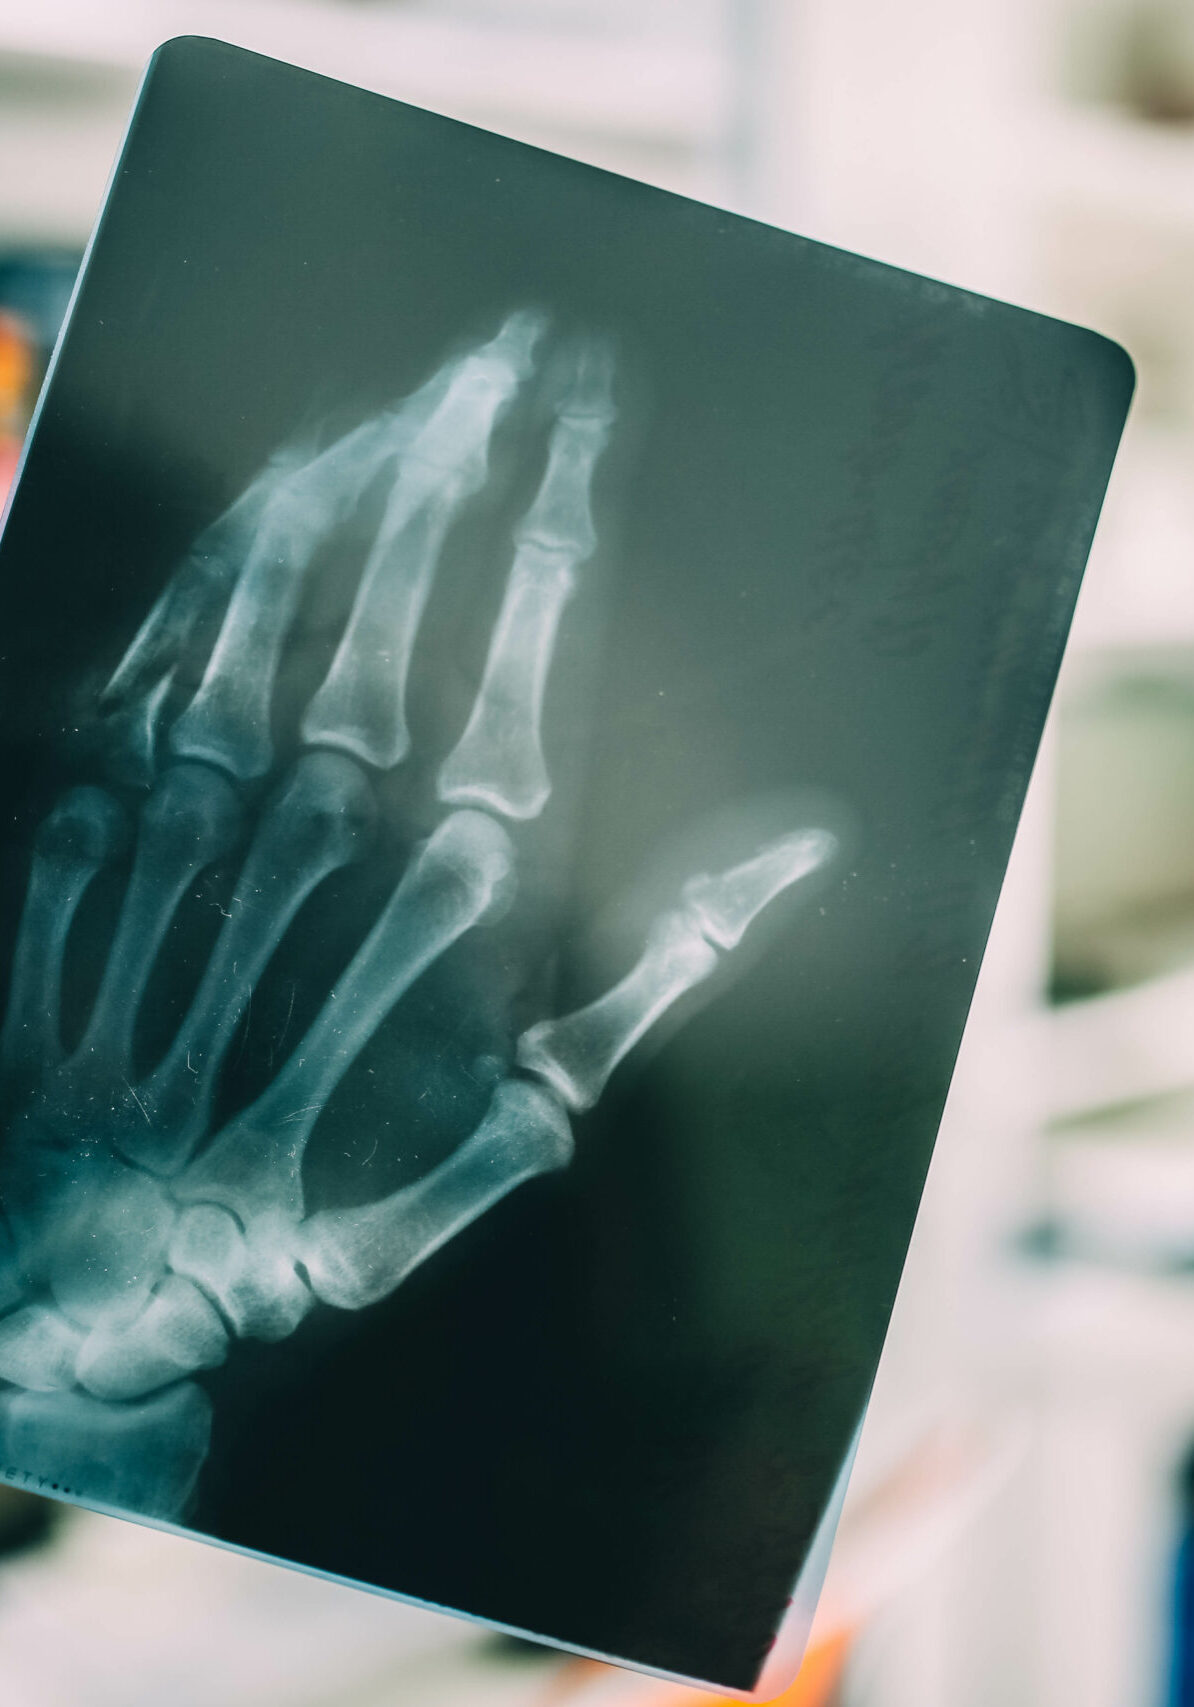 X-ray picture of a hand with a broken little finger, the concept